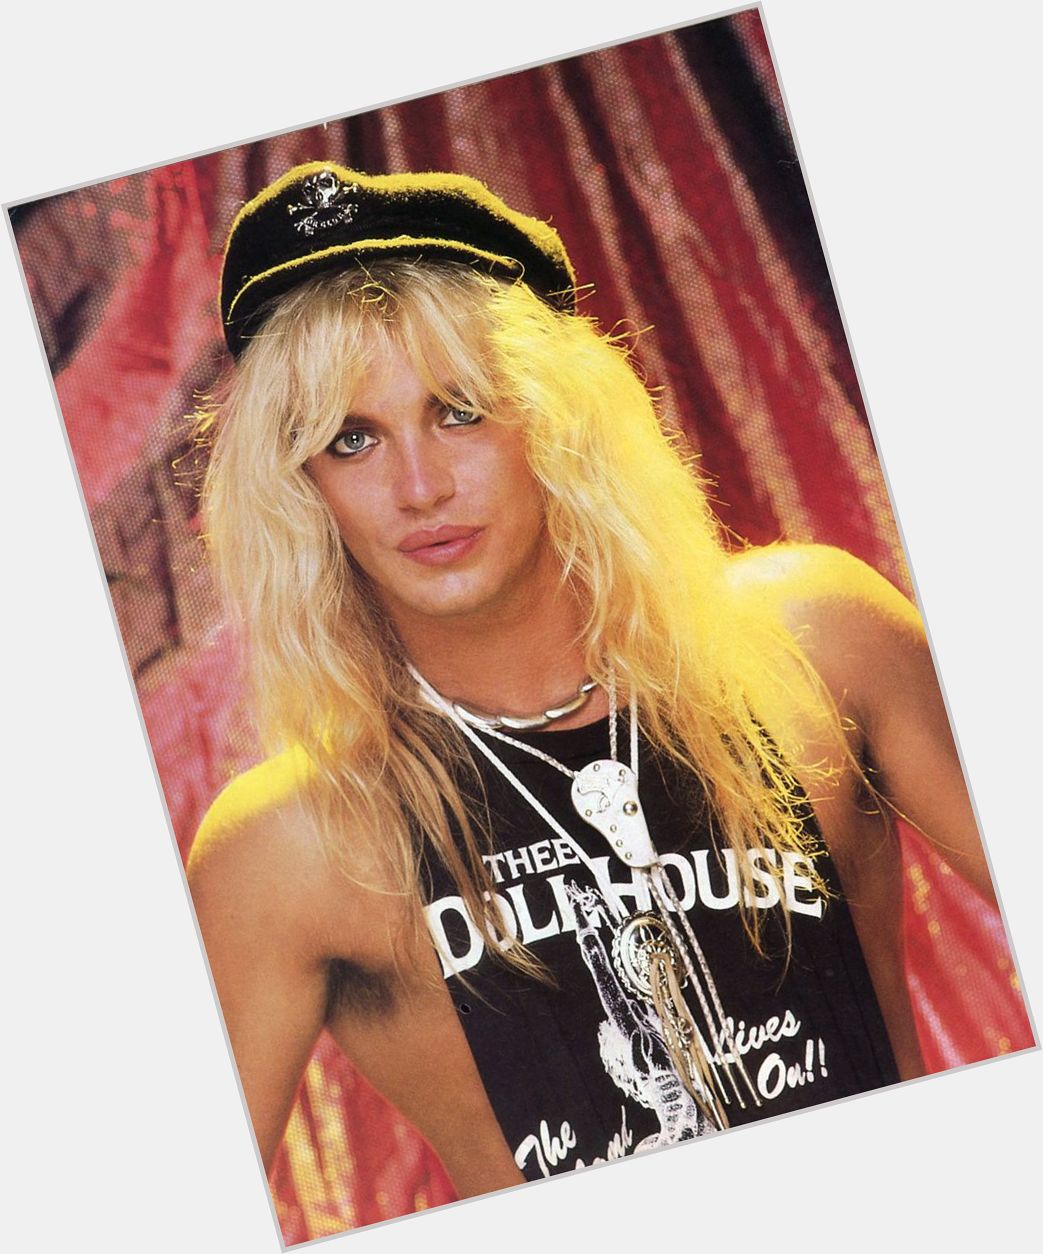 Happy birthday BRET MICHAELS.
Bret Michael Sychak Frontman, lead singer for born on this day March 15, 1963. 